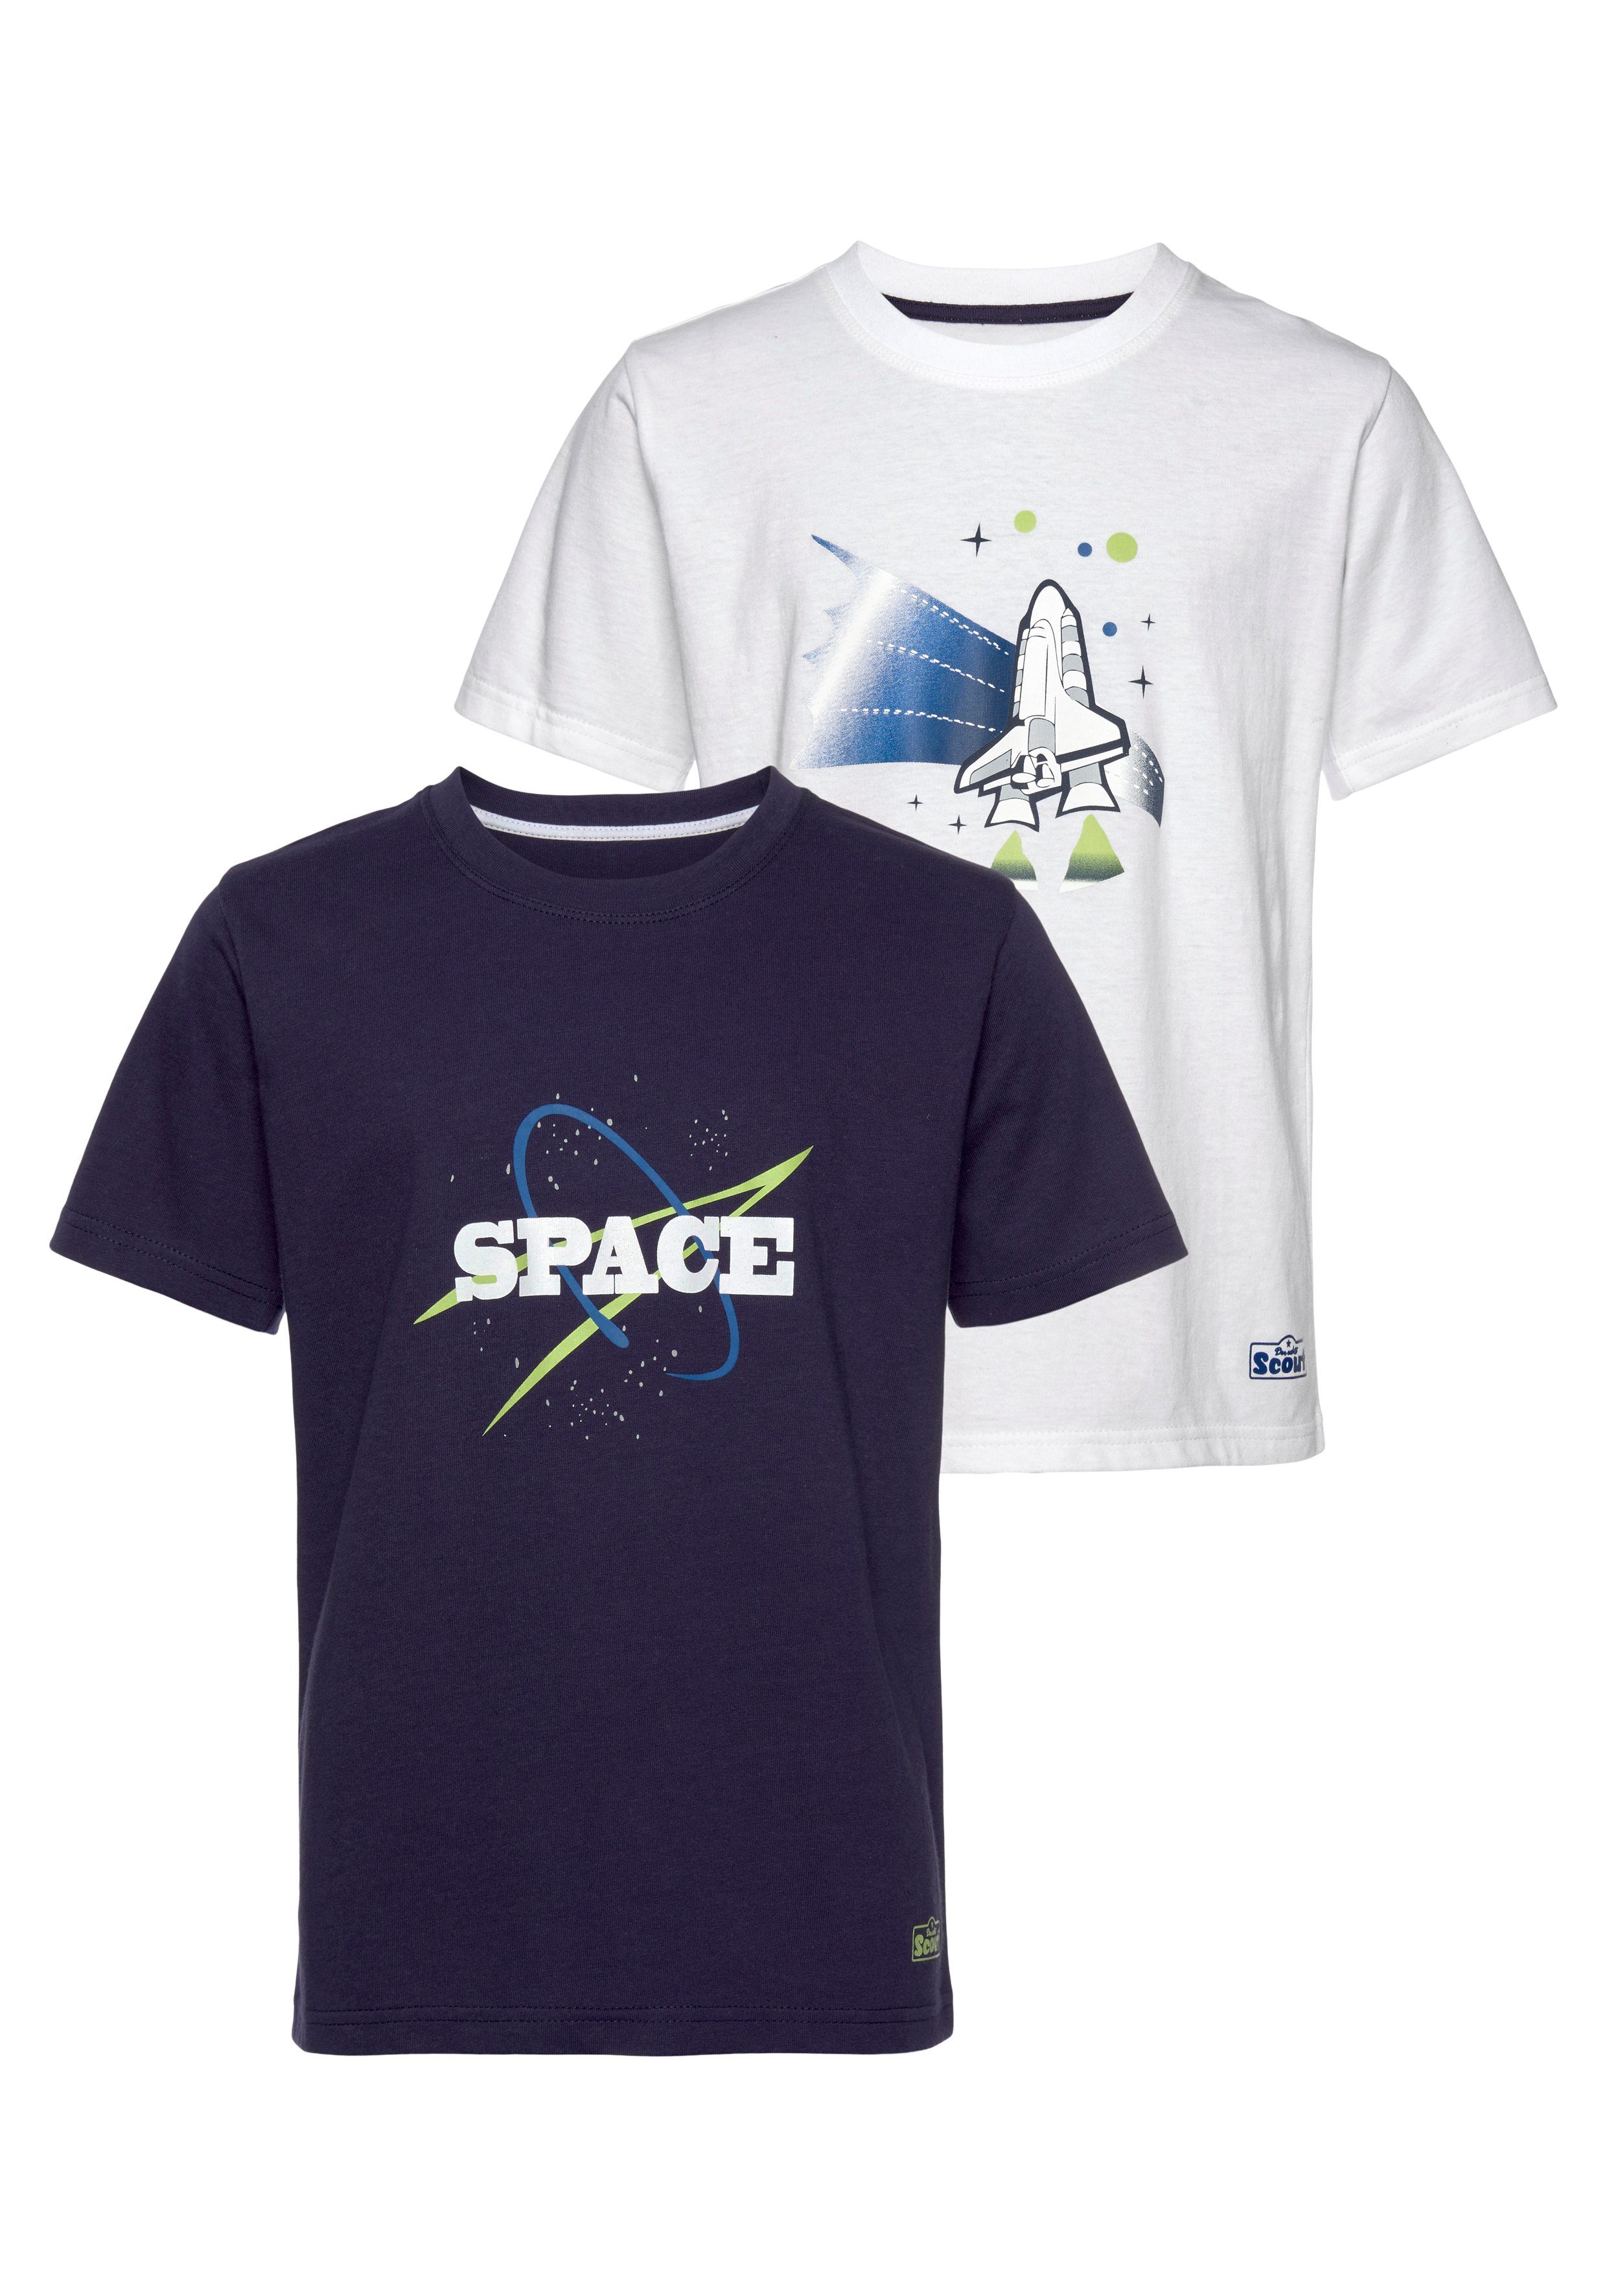 aus (Packung, Bio-Baumwolle SPACE Scout T-Shirt 2er-Pack)